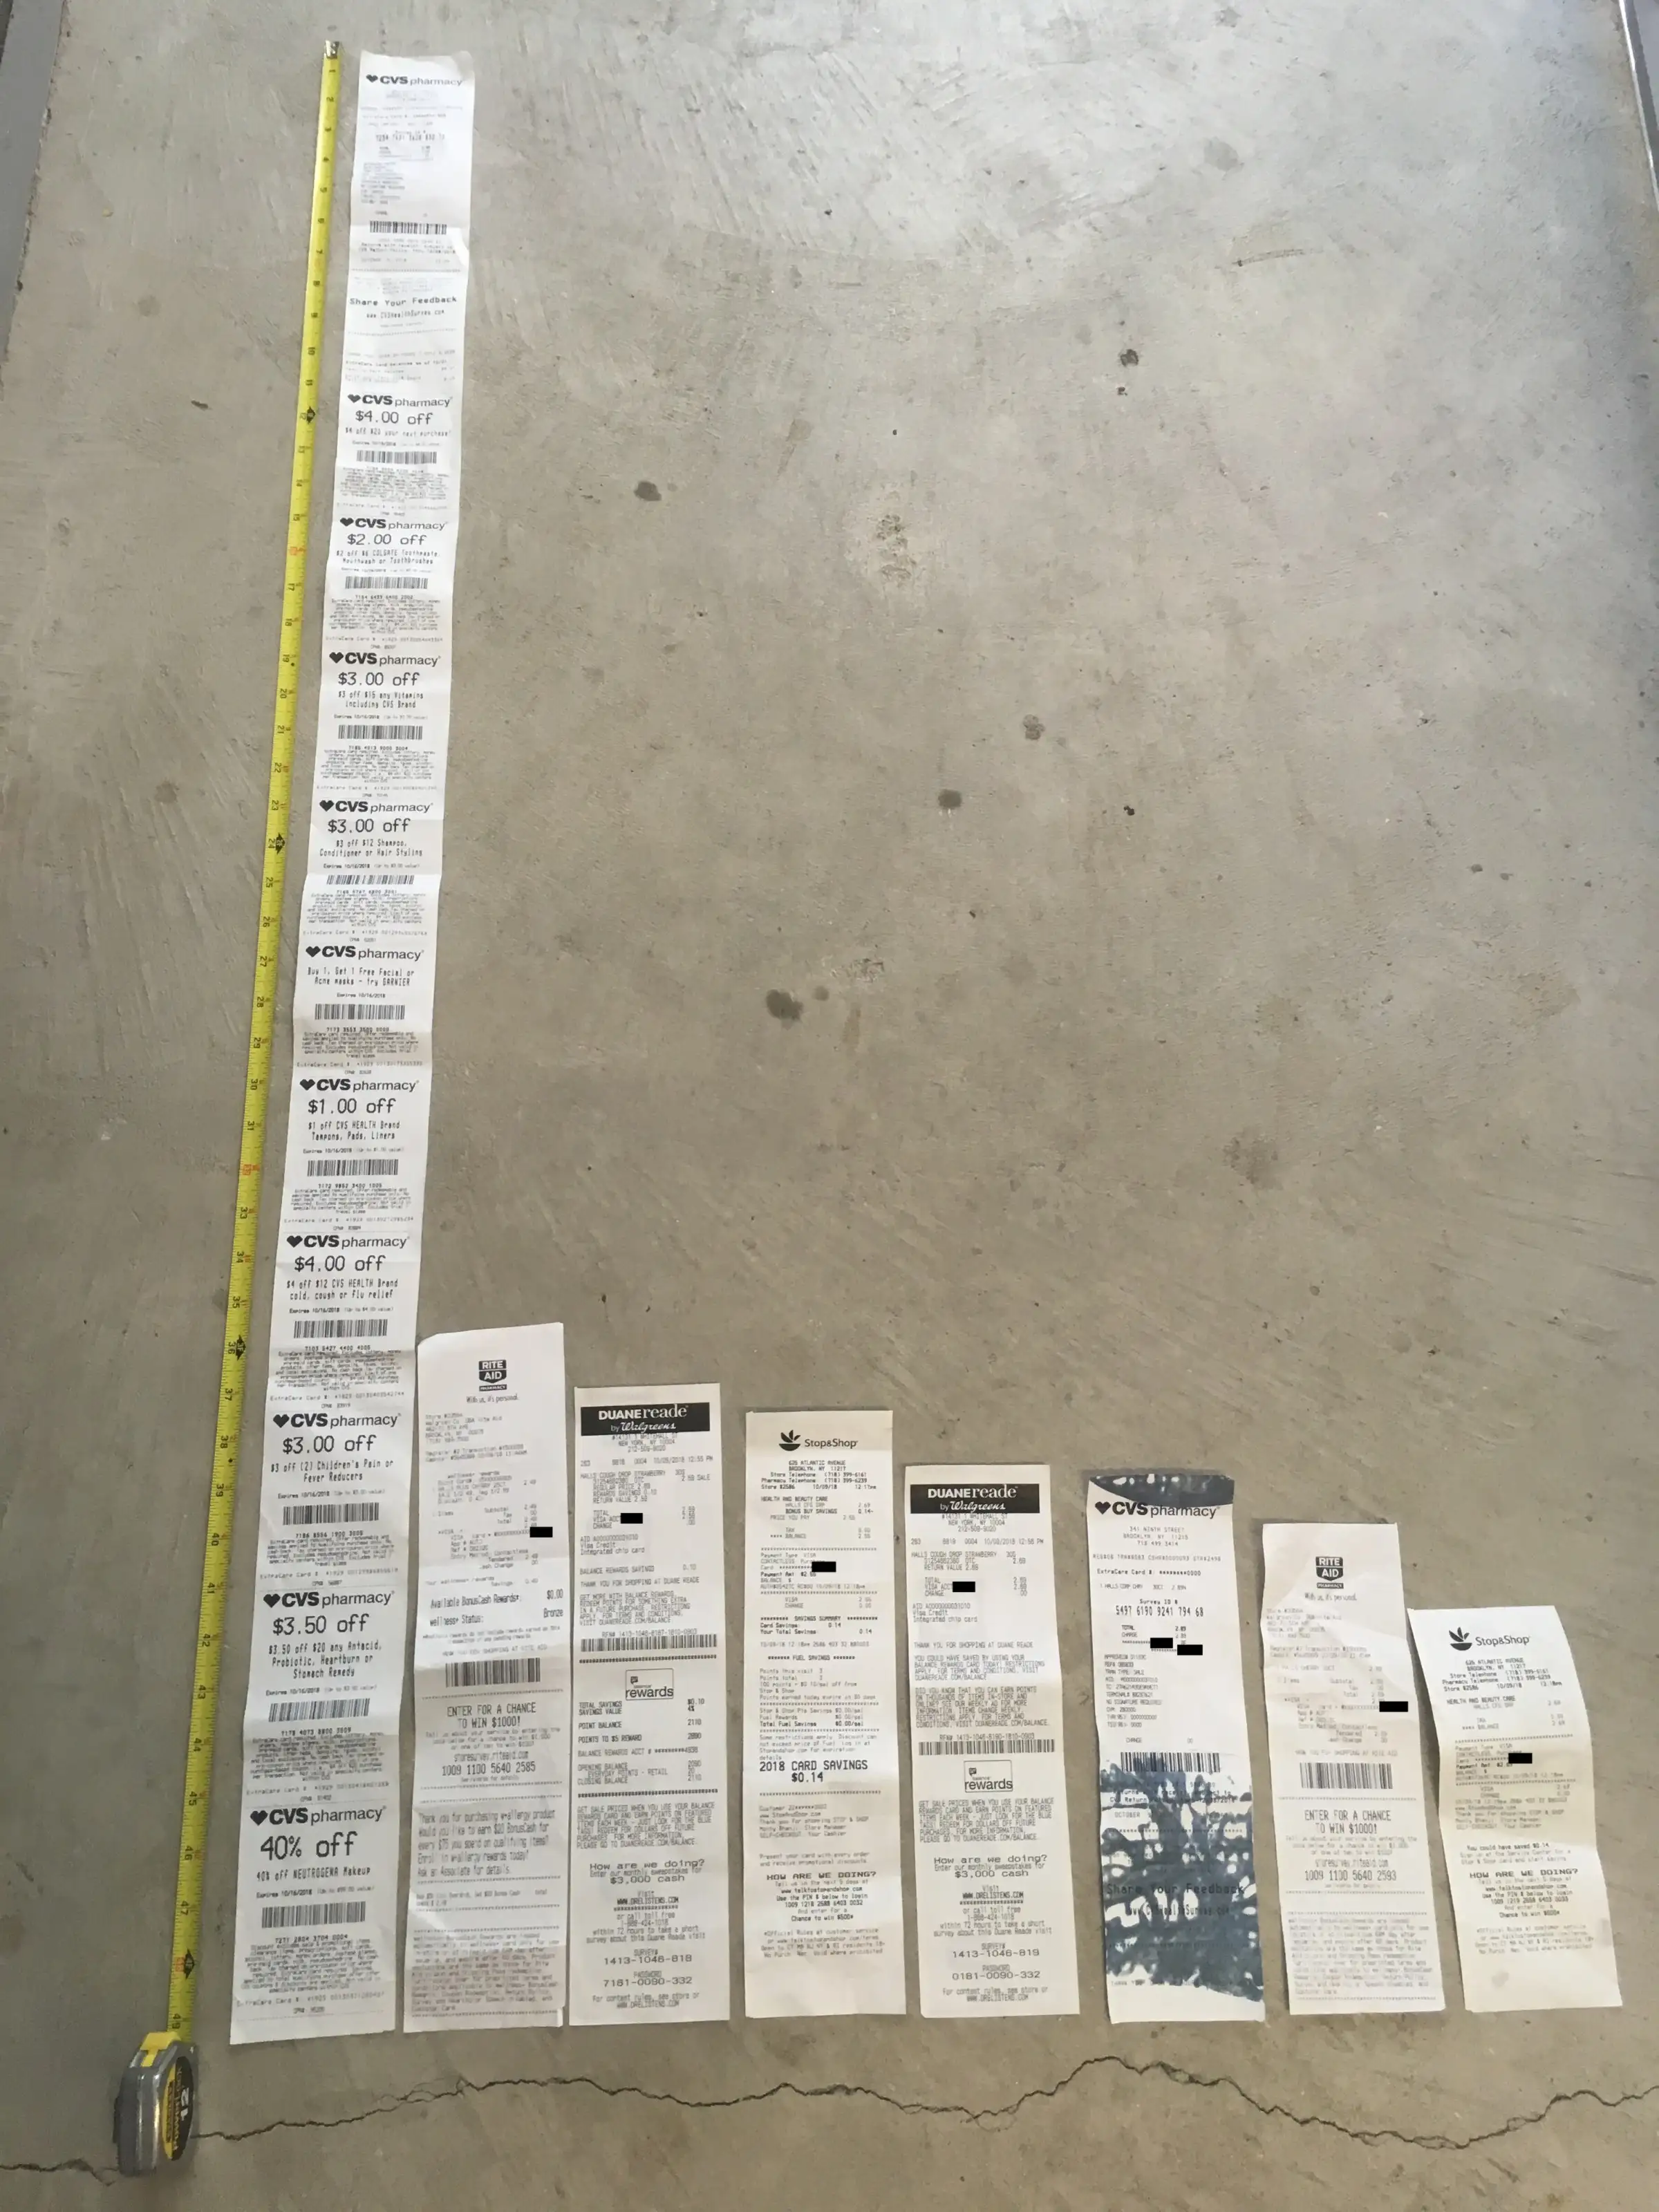 CVS receipt, left, is several feet long and shown next to a tape measure and other, normally-sized receipts.